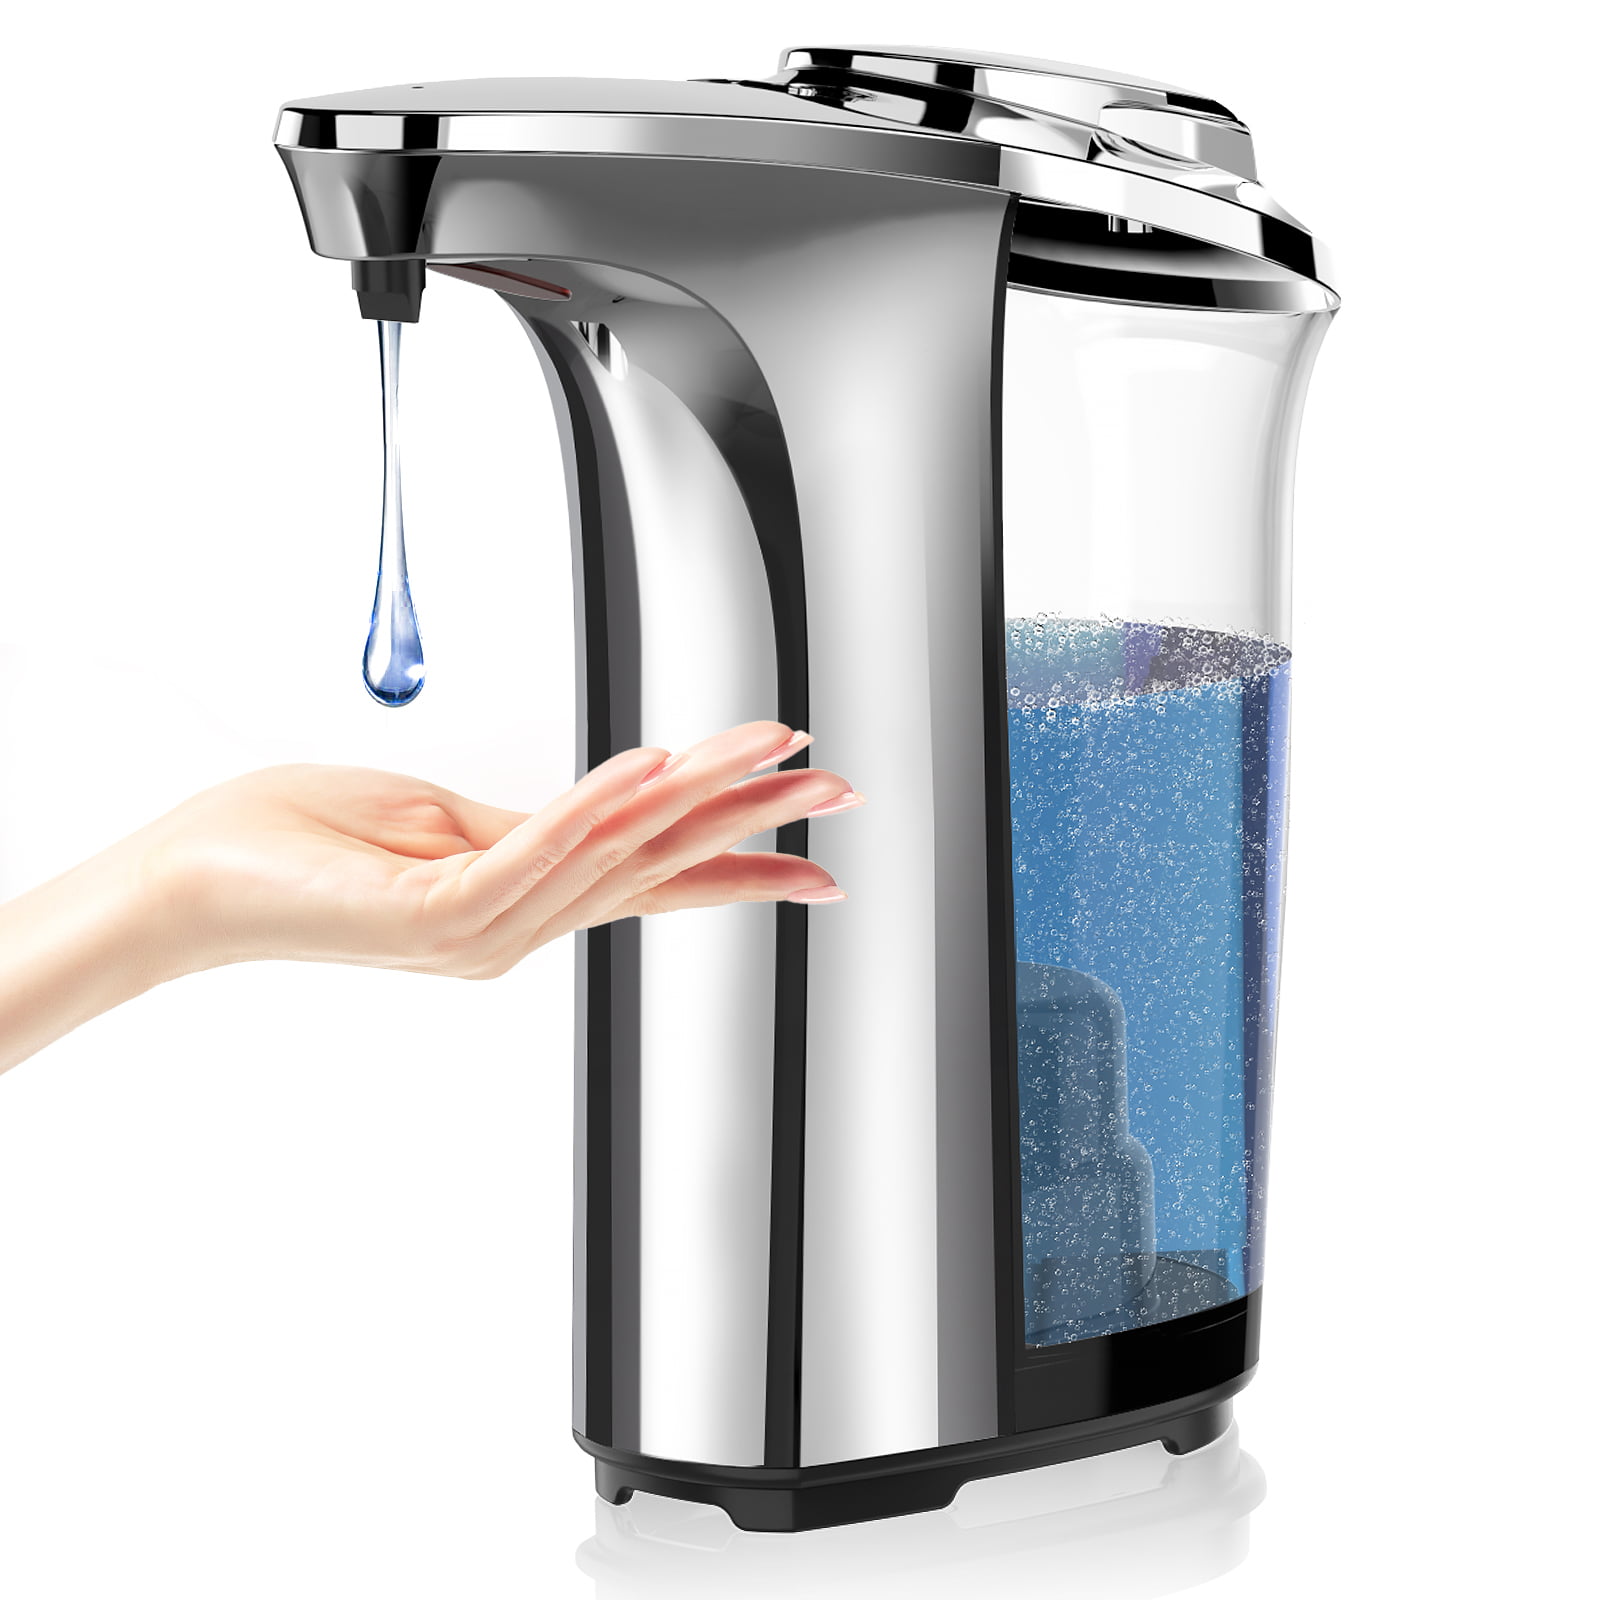 Details about   Touchless Soap Dispenser Automatic Bath Dispensing 17oz Battery Operated Stylish 